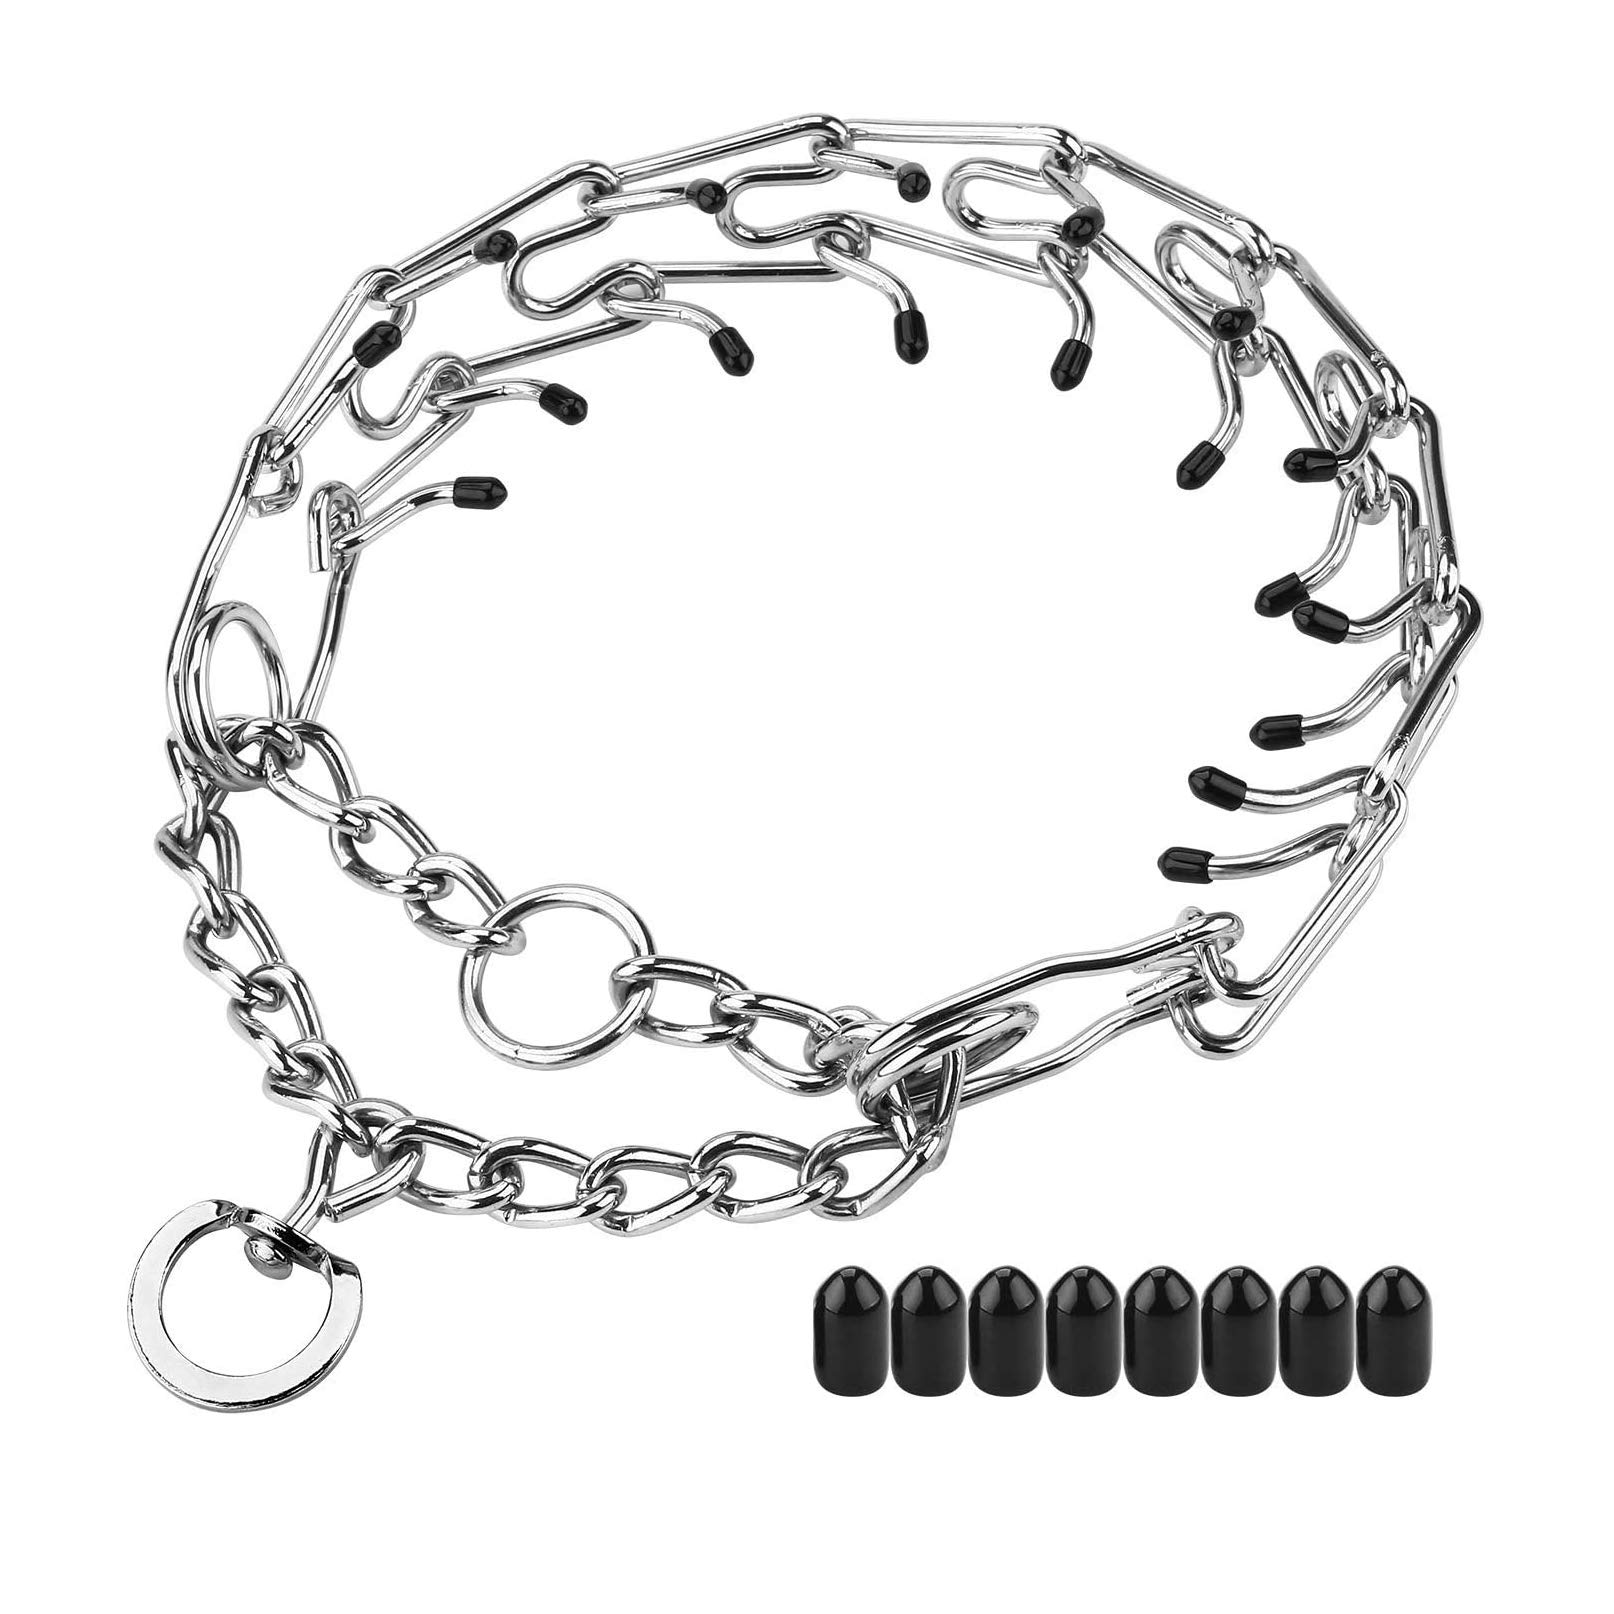 Prong Training Collar for Dogs with Chrome Plated Steel Spikes in all Sizes